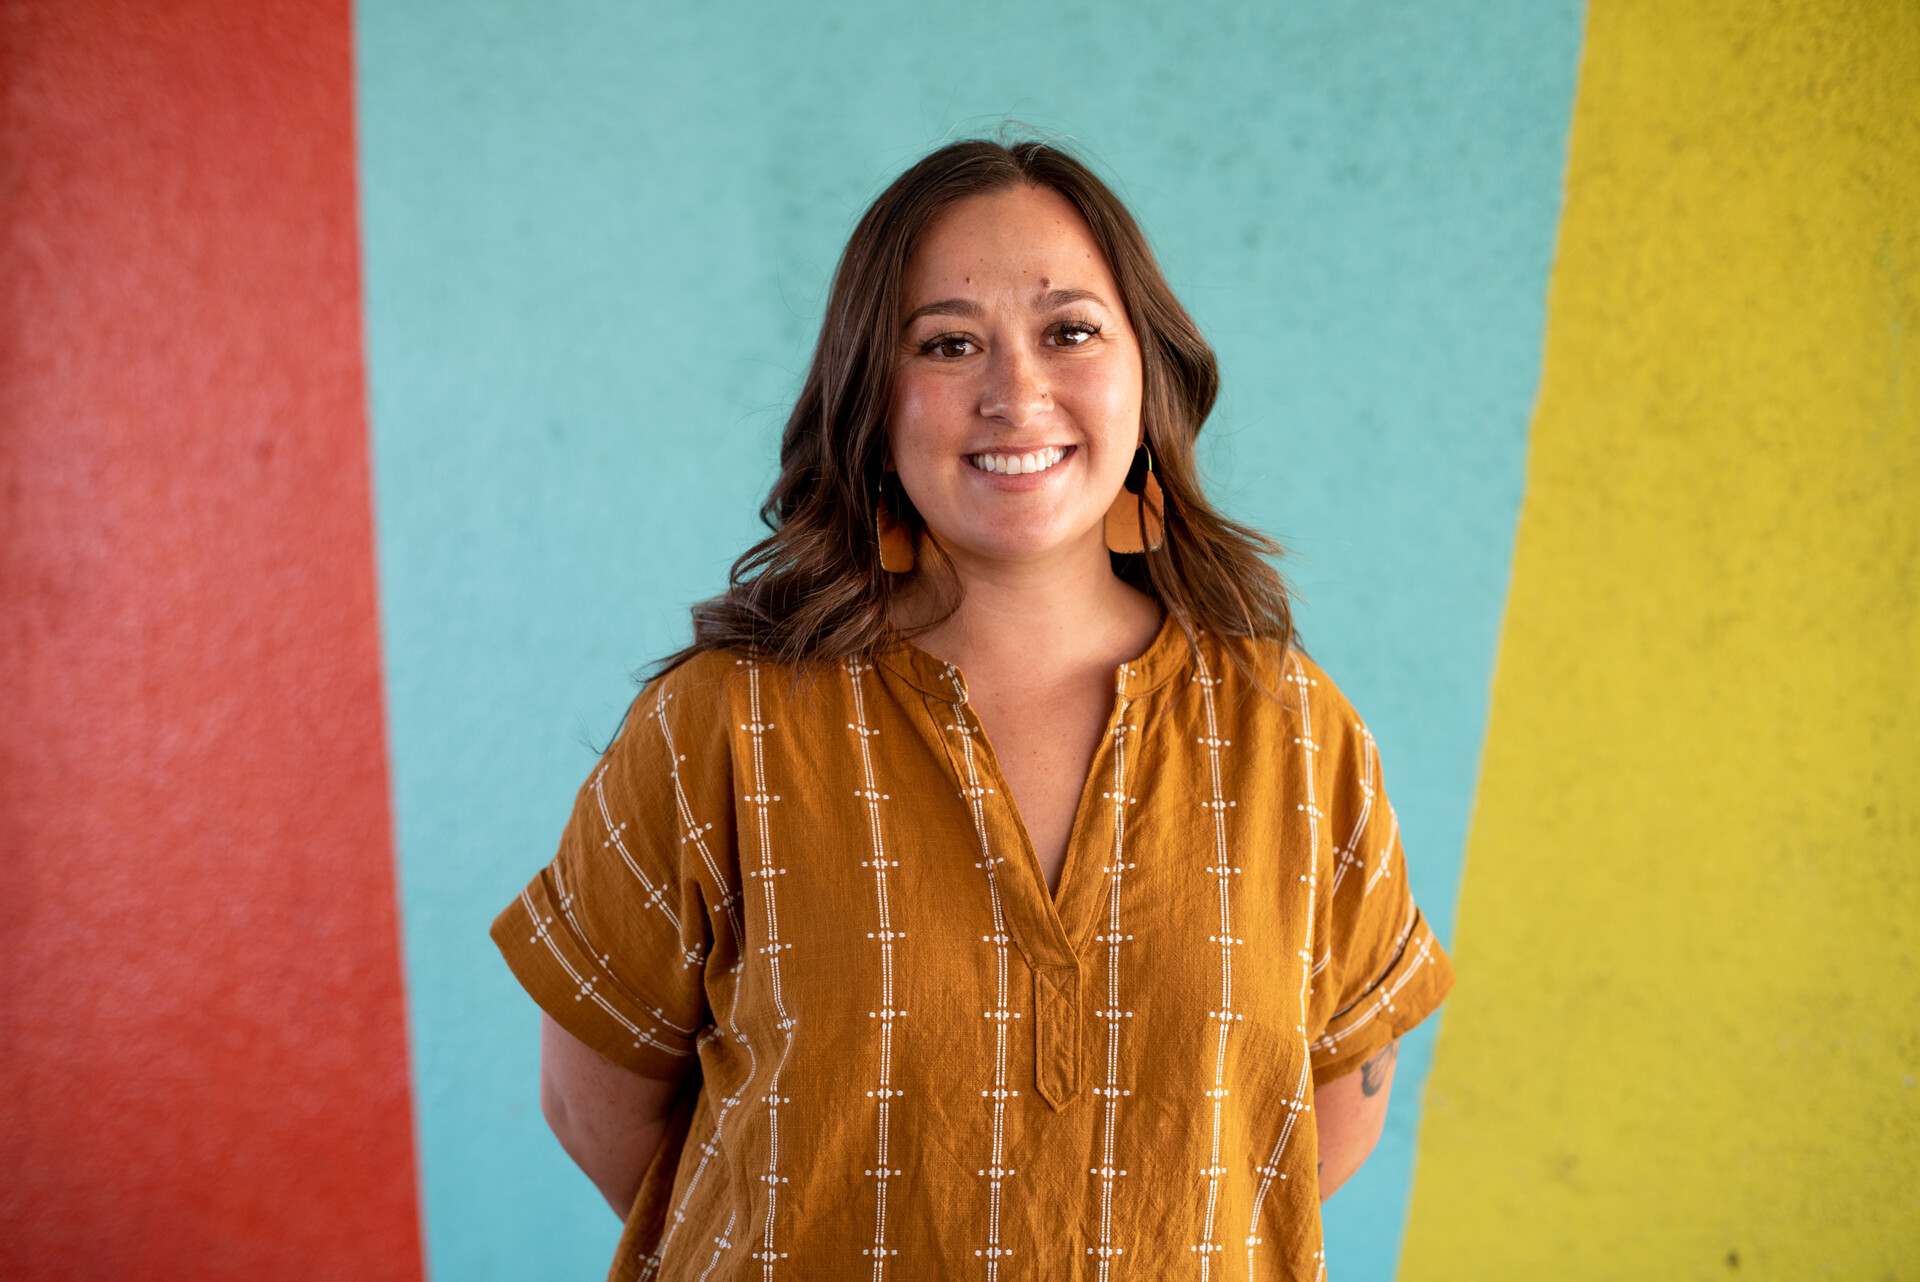 A Latina woman with long brown hair smiles at the camera with a colorful wall in the background.